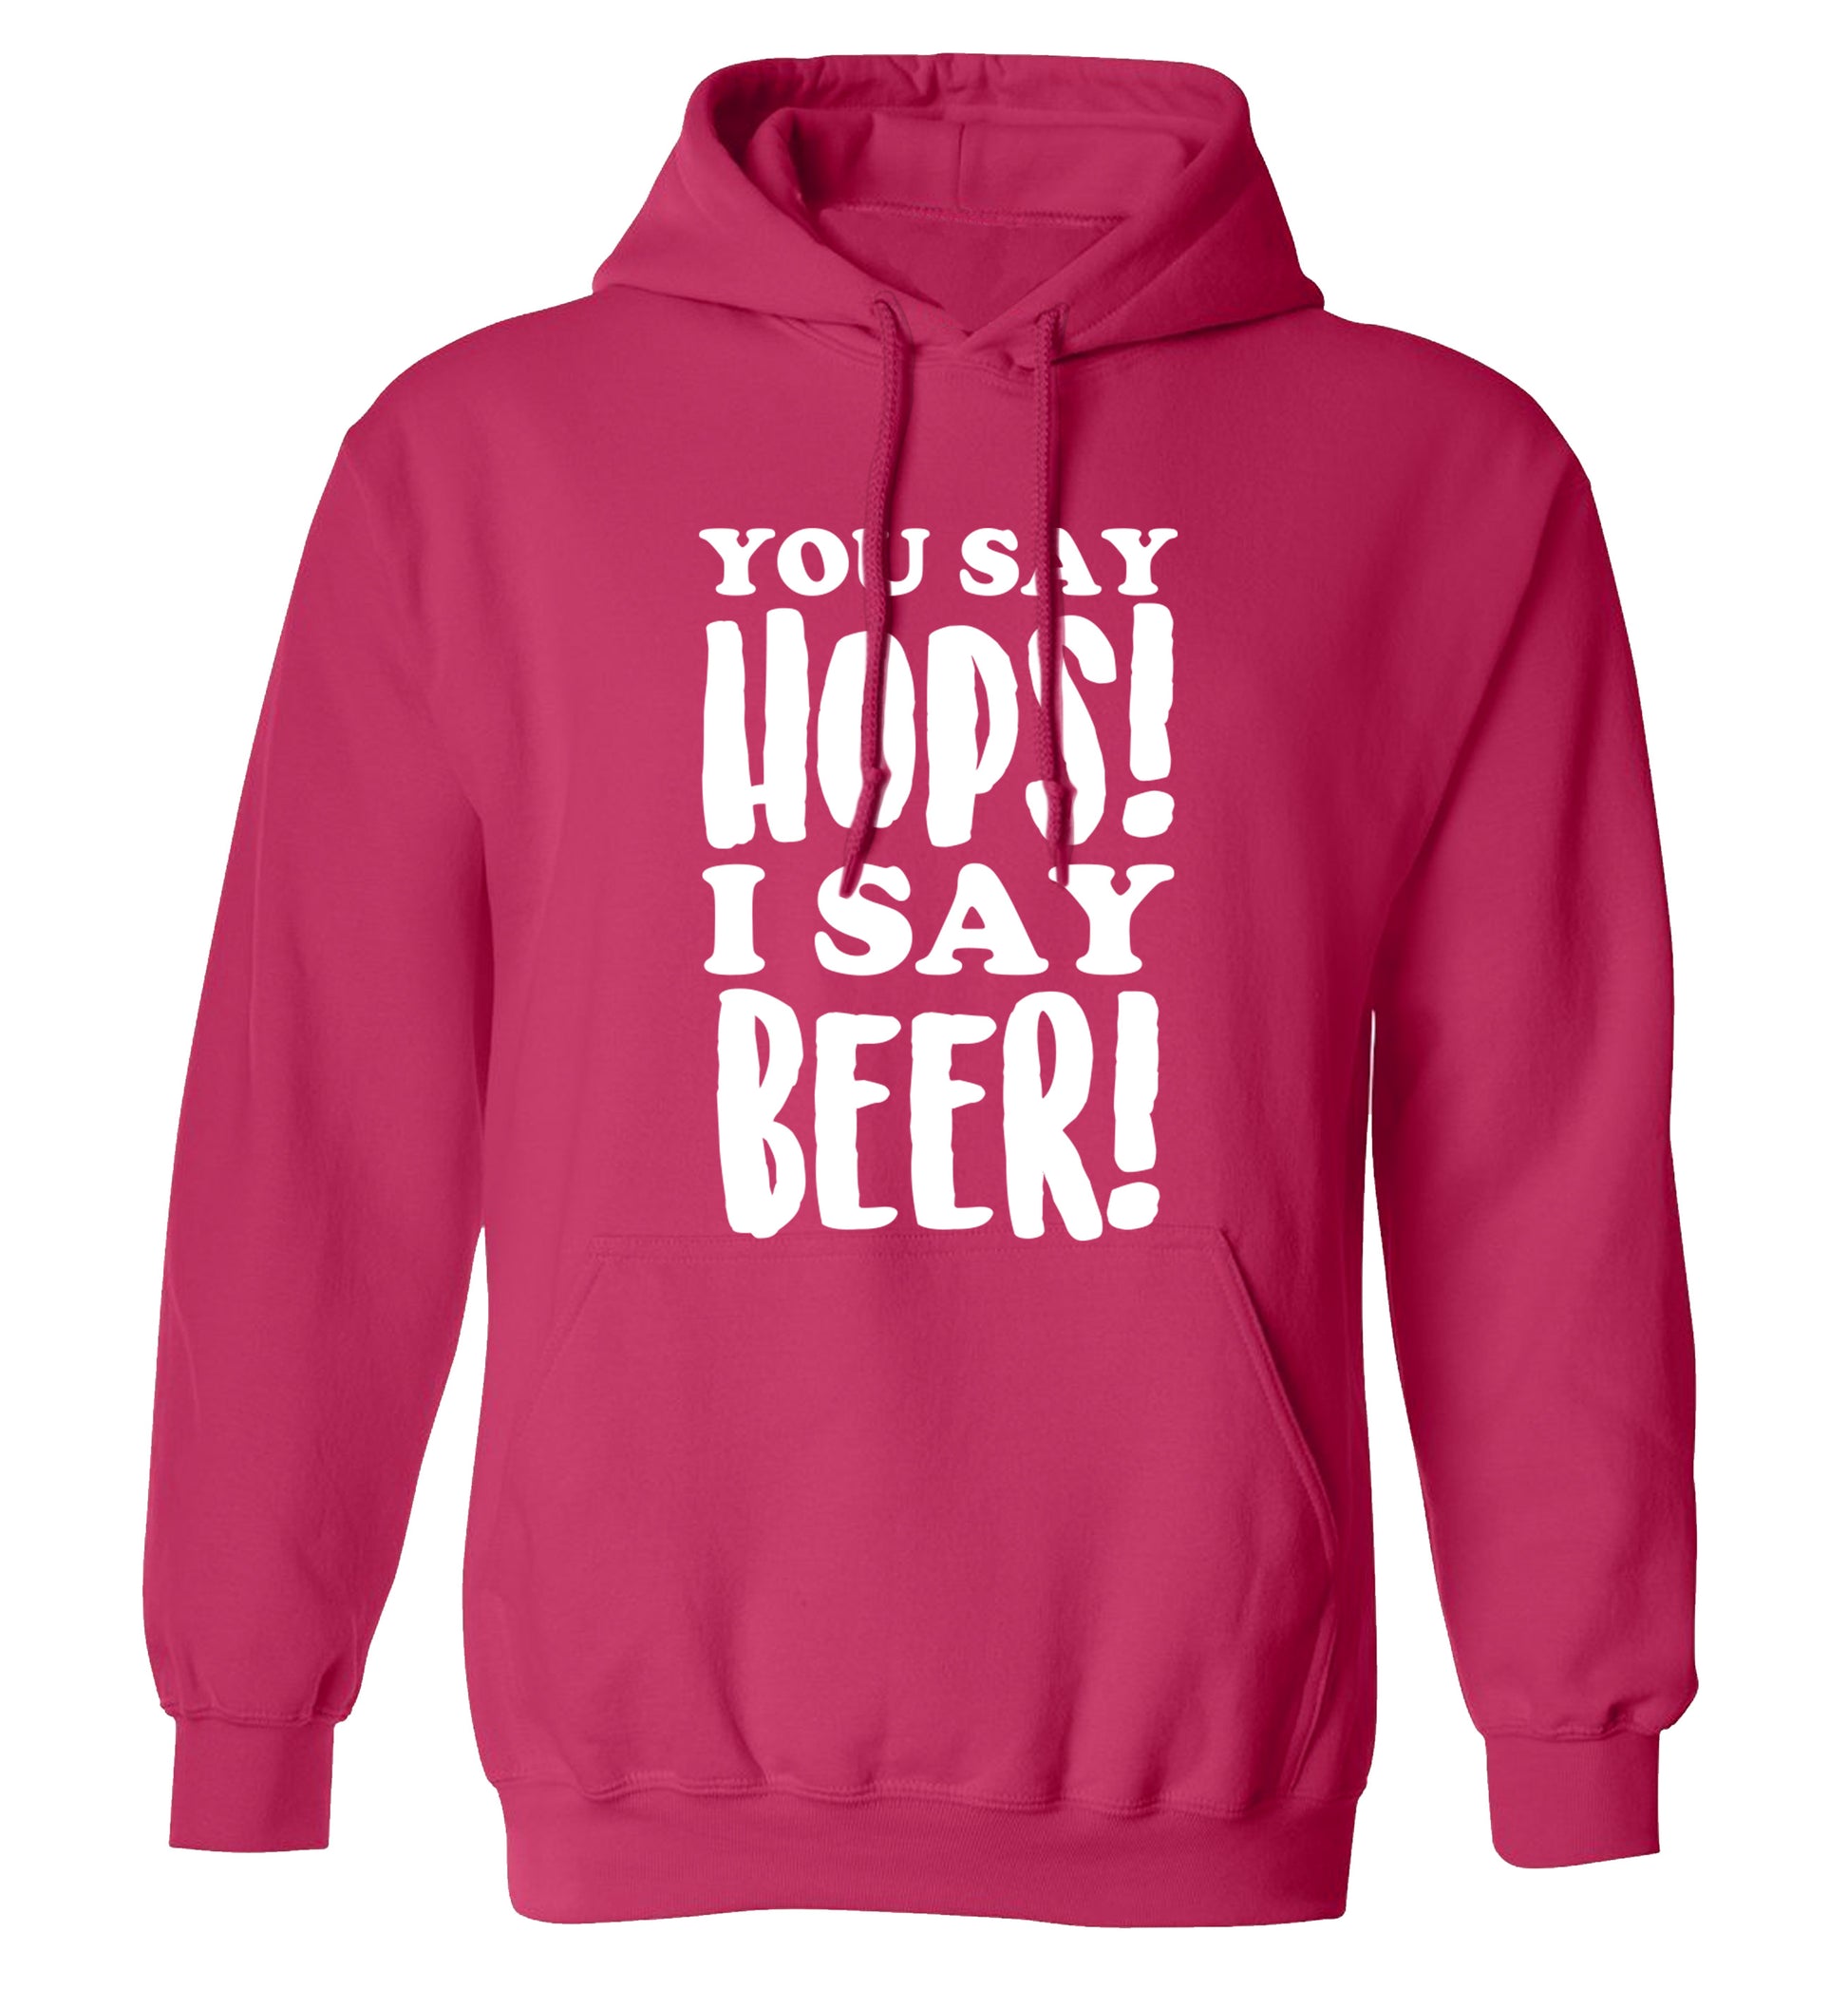 You say hops I say beer! adults unisex pink hoodie 2XL